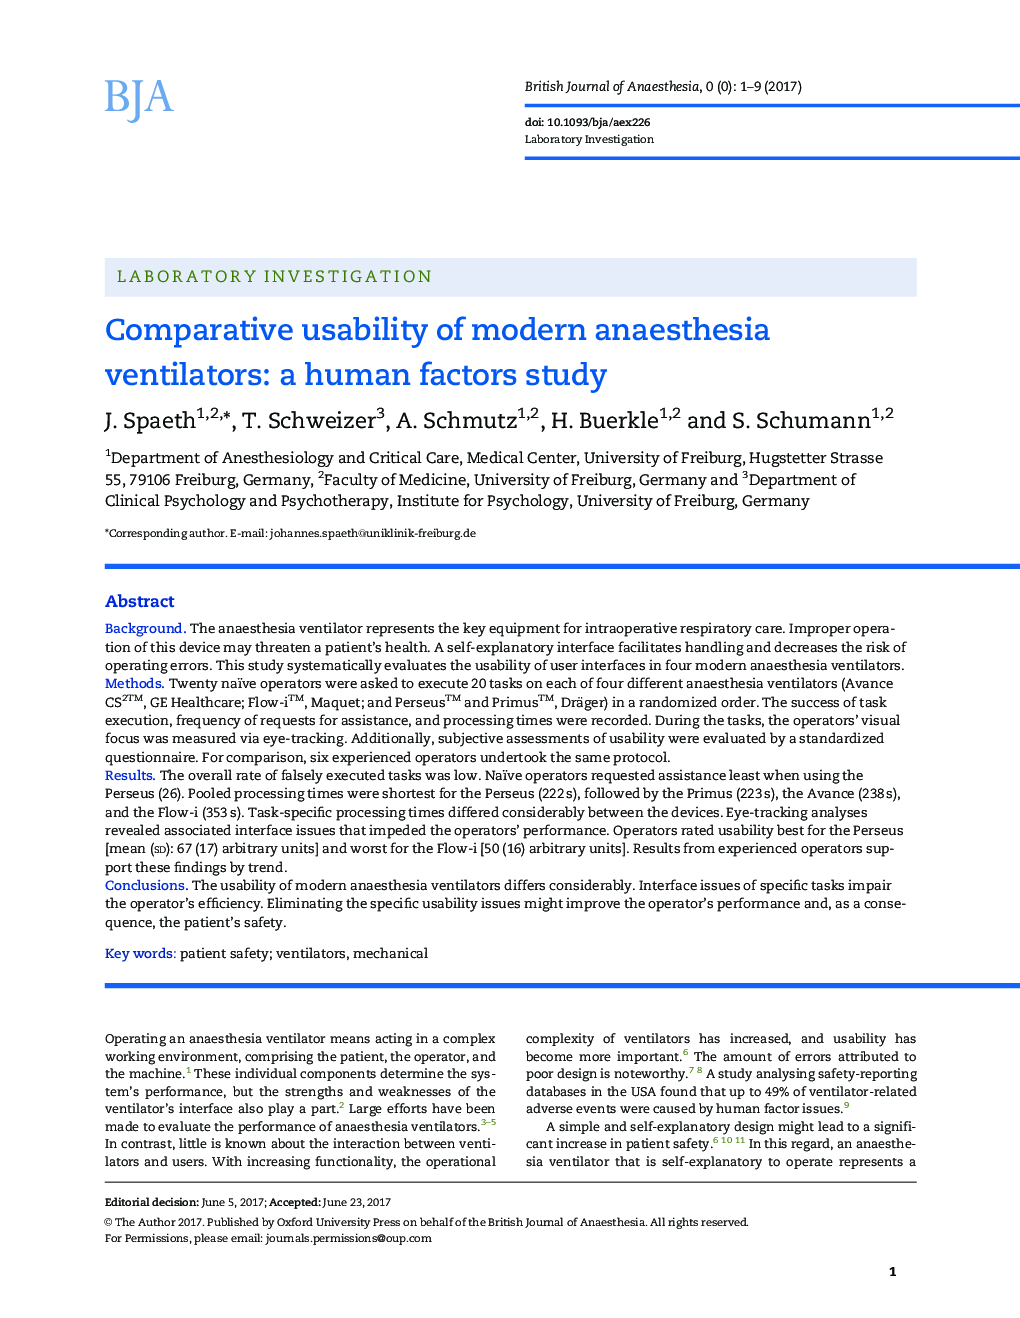 Comparative usability of modern anaesthesia ventilators: a human factors study